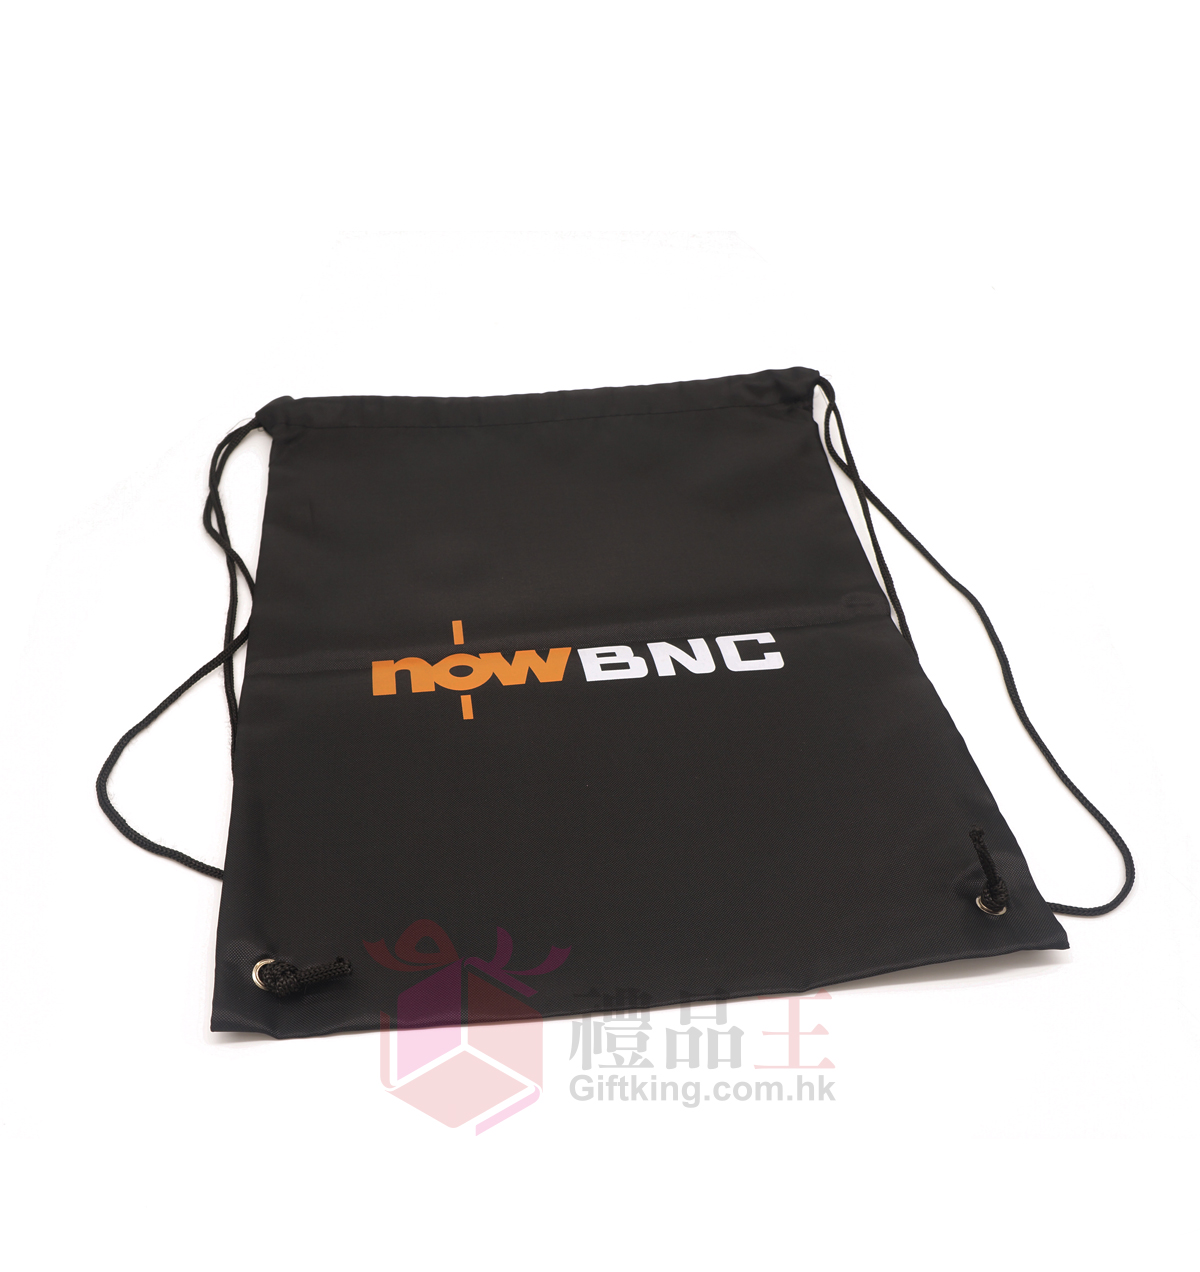 NOW TV rope bag (clothing gift)